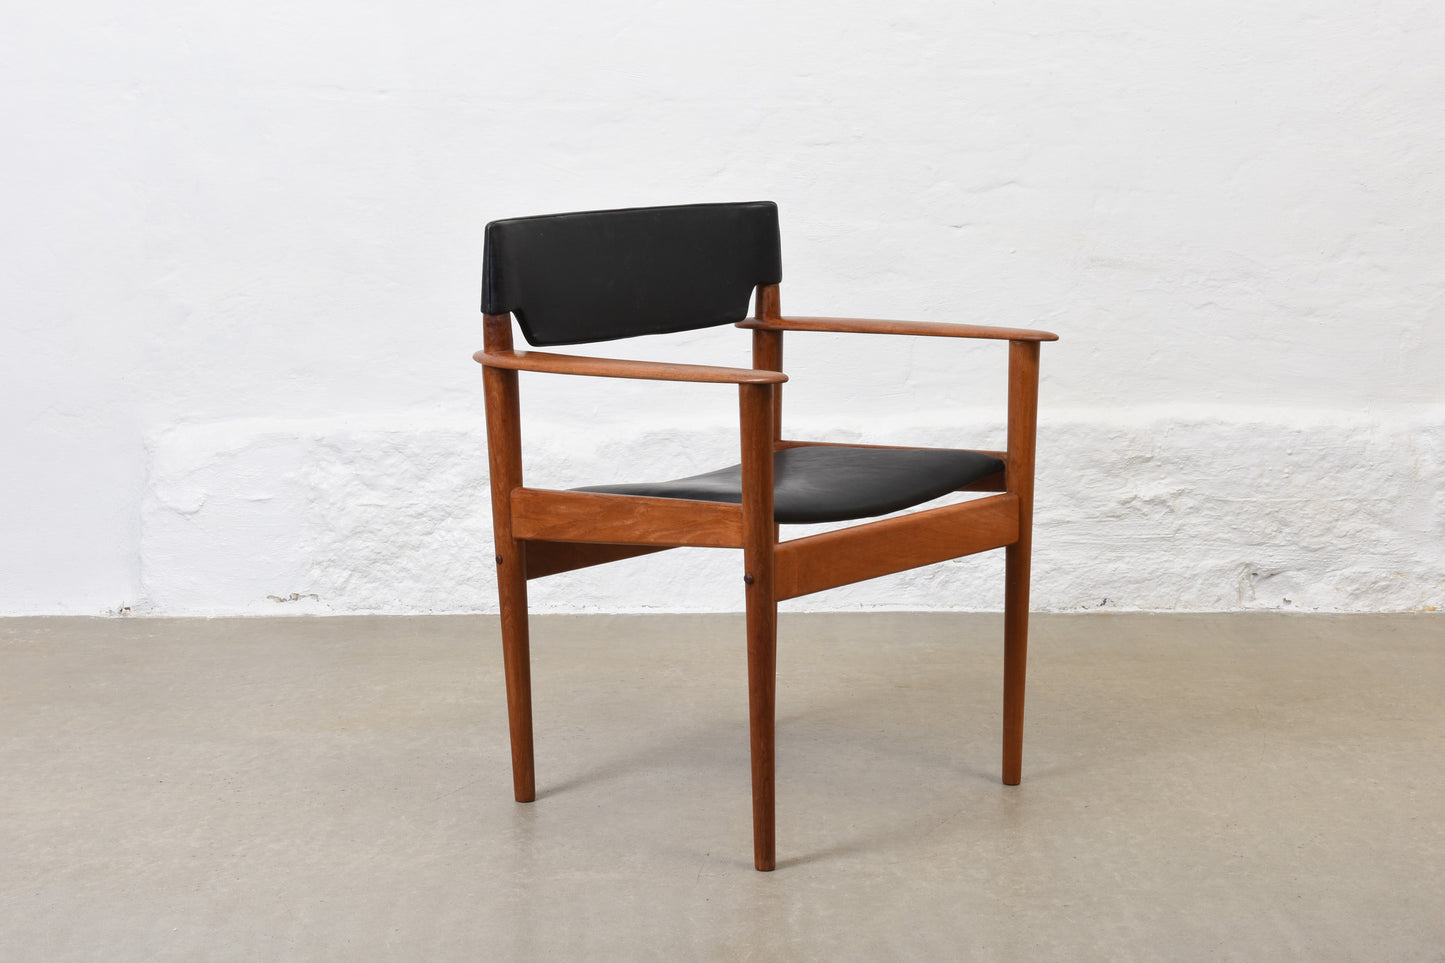 1950s teak + leather armchair by Grete Jalk